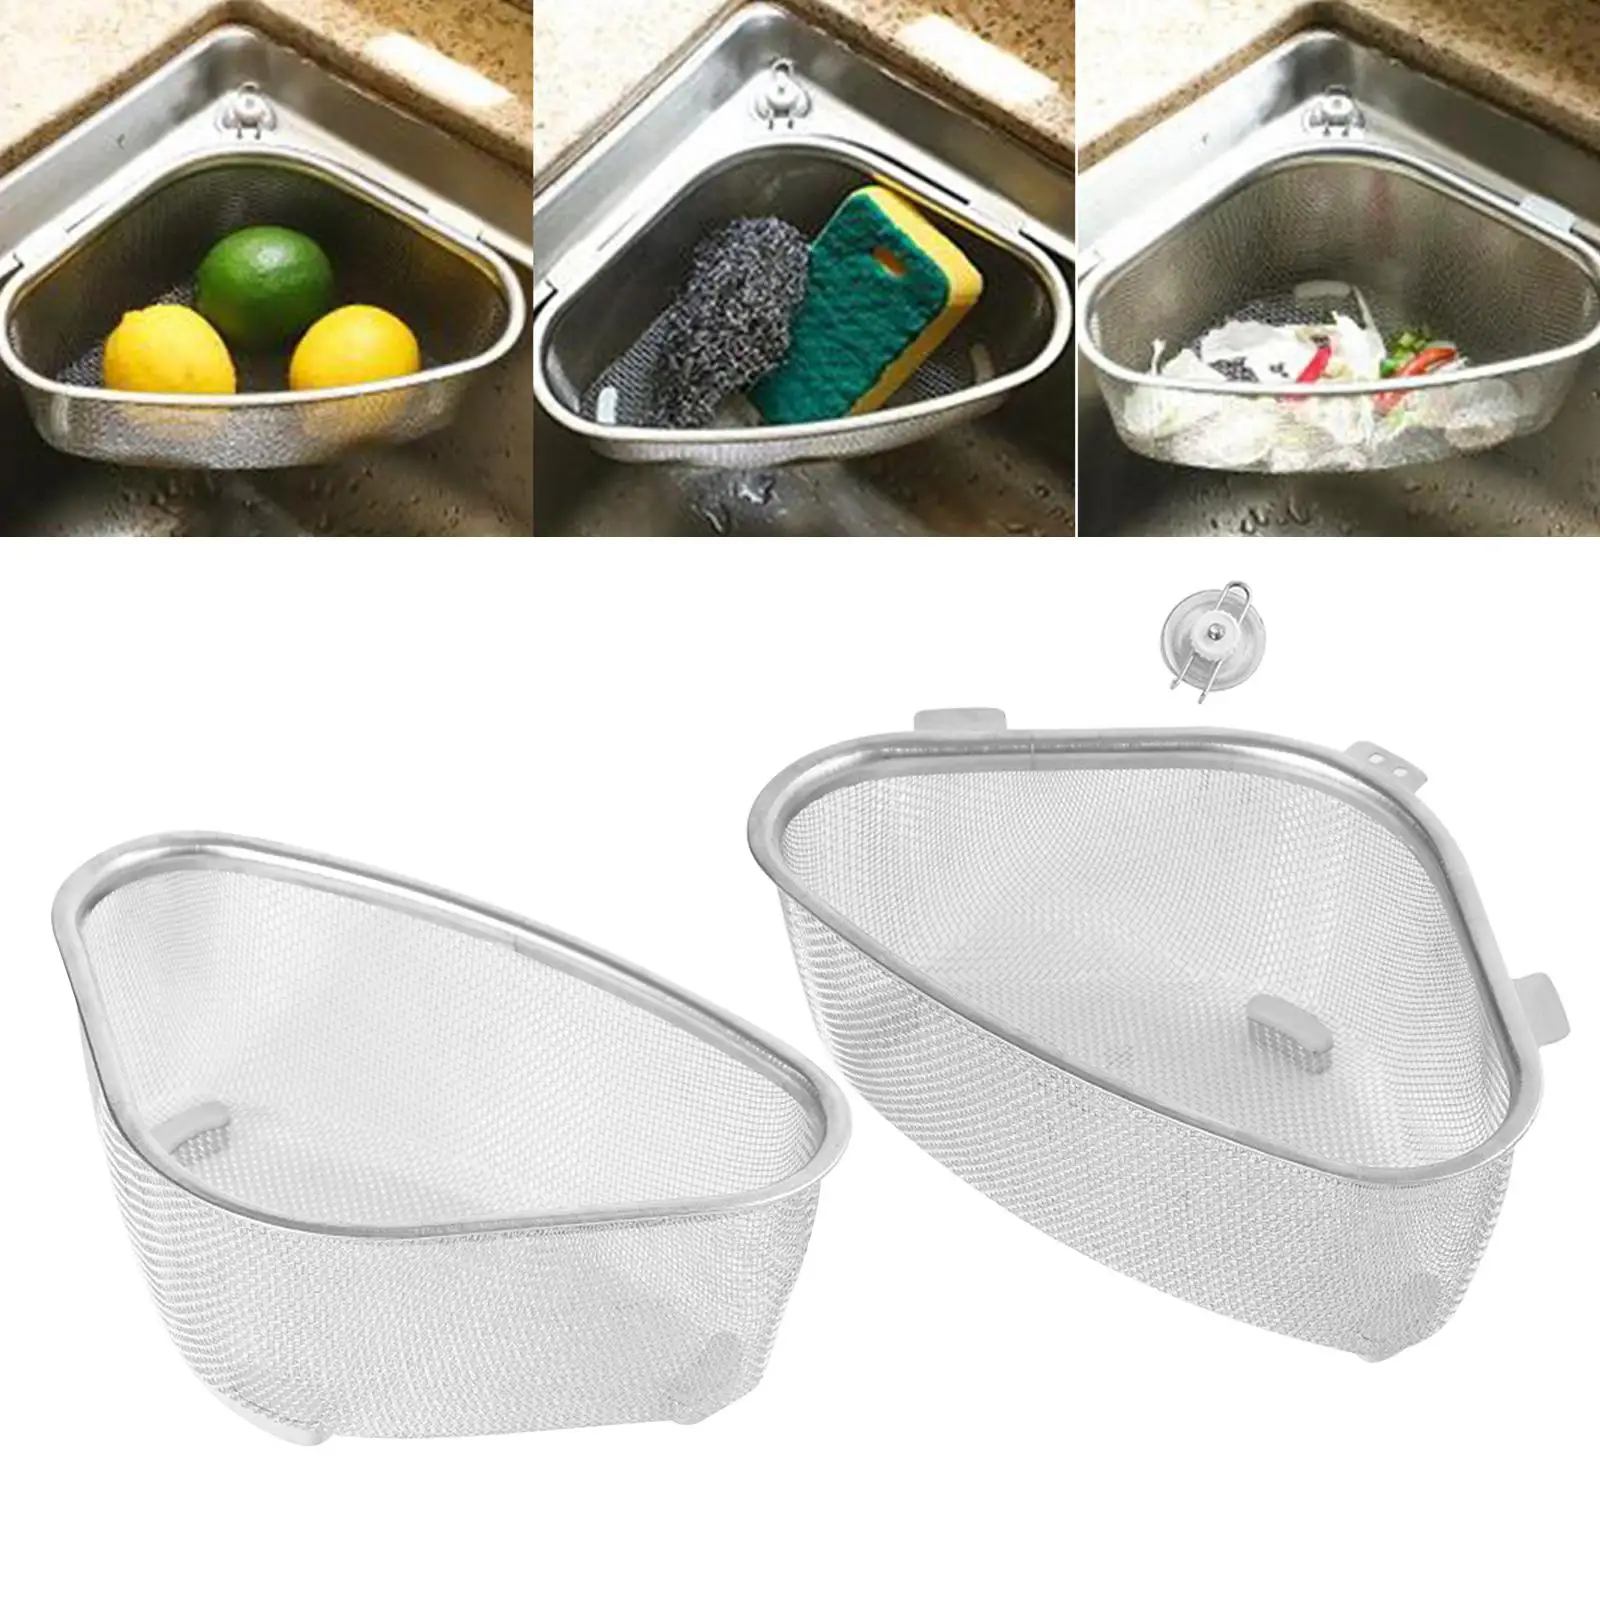 Durable Over The Sink Colander Strainer Basket for Filtering, Straining Out Impurities Multiple Uses Clean Handy Tool